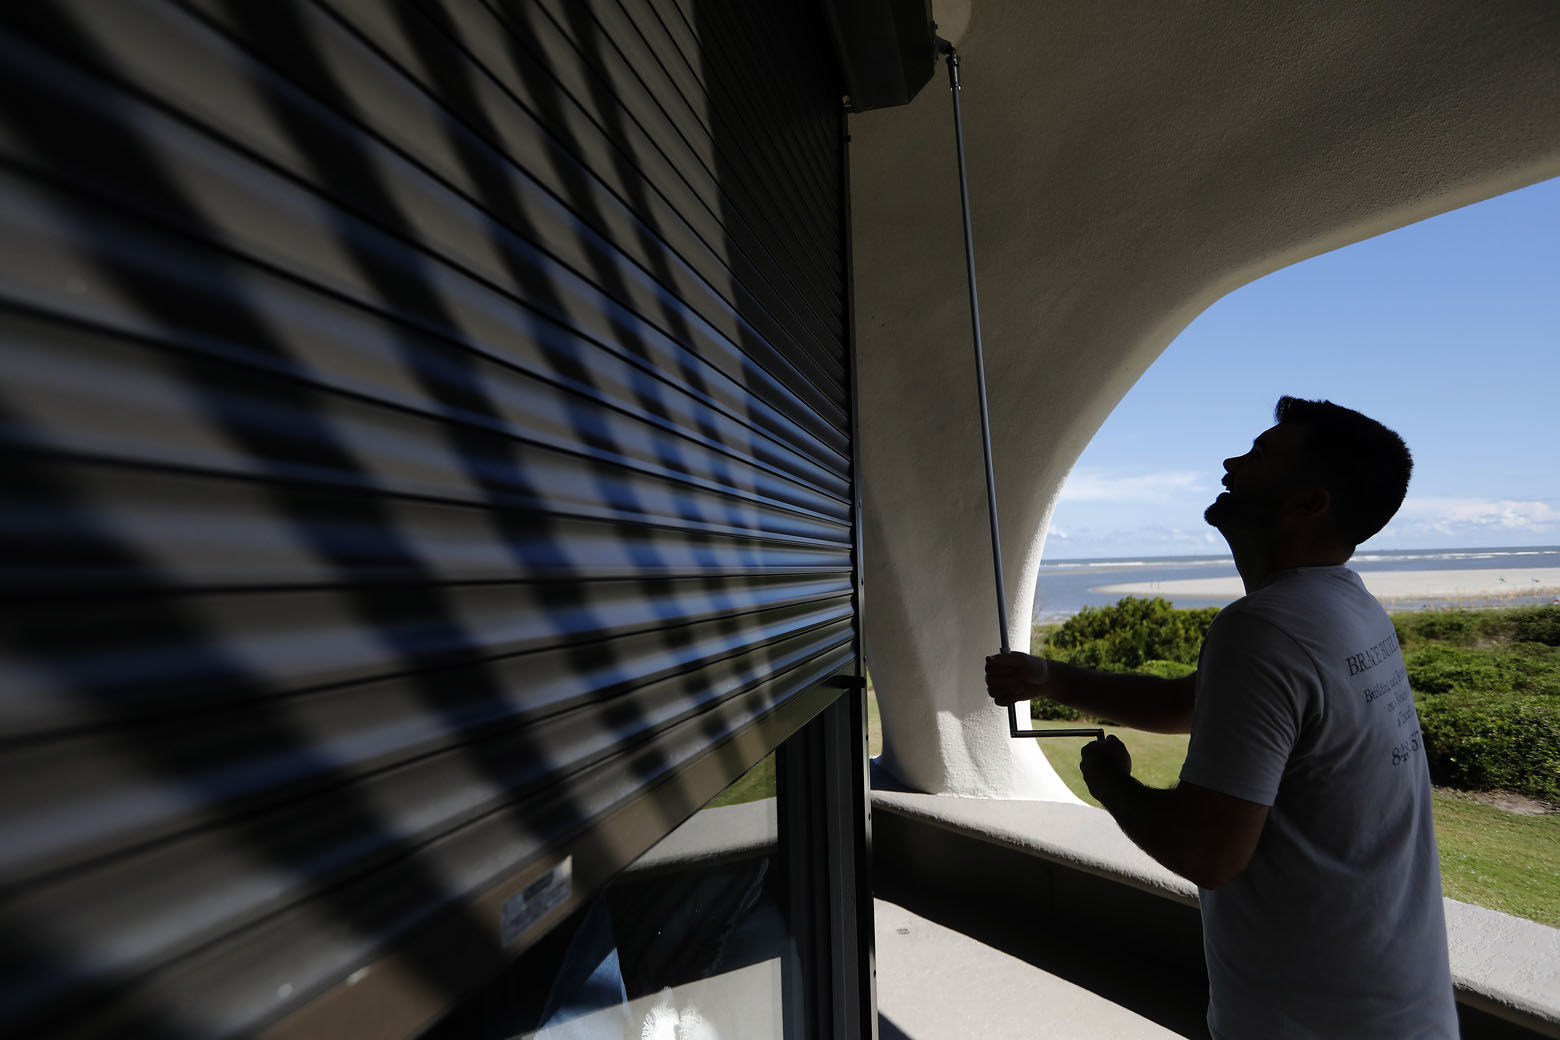 Chris Brace, from Charleston, S.C. lowers hurricane shutters on a client's house in preparation for Hurricane Florence at Sullivan's Island, S.C., Monday, Sept. 10, 2018. Brace said that after S.C. Gov. Henry McMaster ordered an evacuation the property owner asked for the house to be boarded up. (AP Photo/Mic Smith)